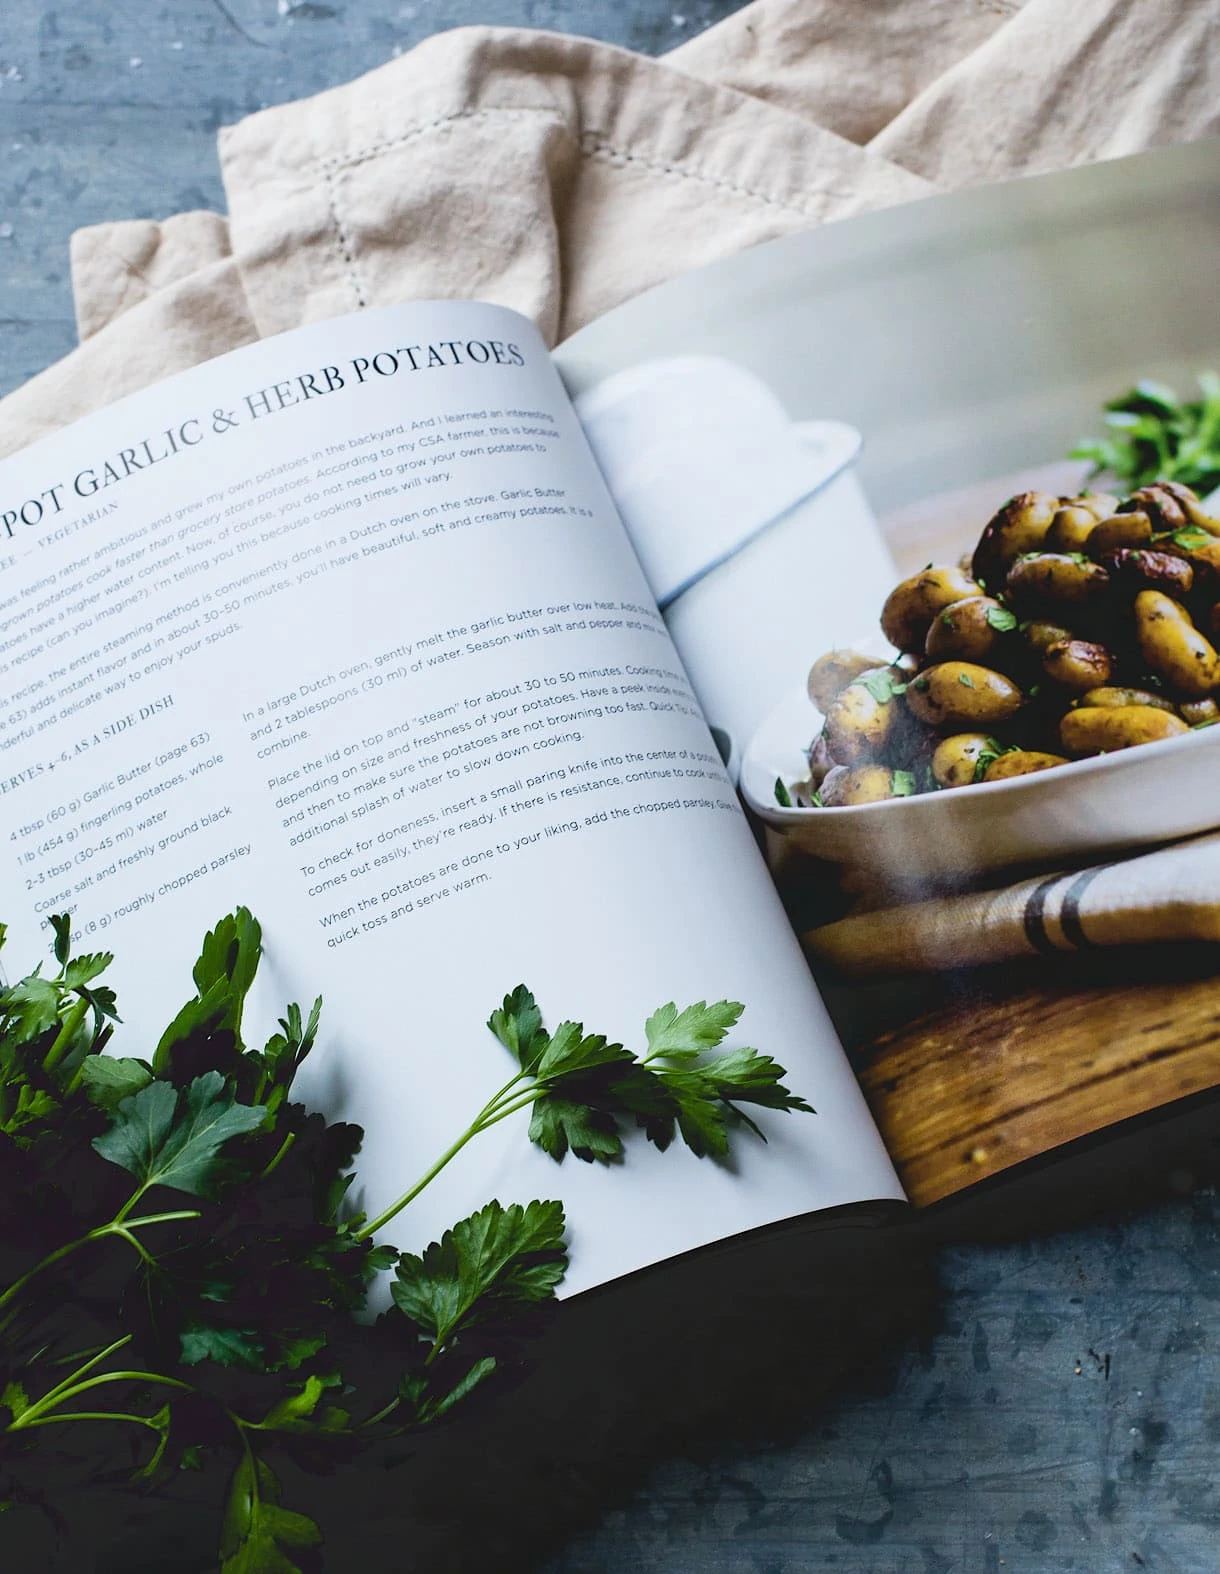 Garlic Butter Fingerling Potatoes from The Clever Cookbook